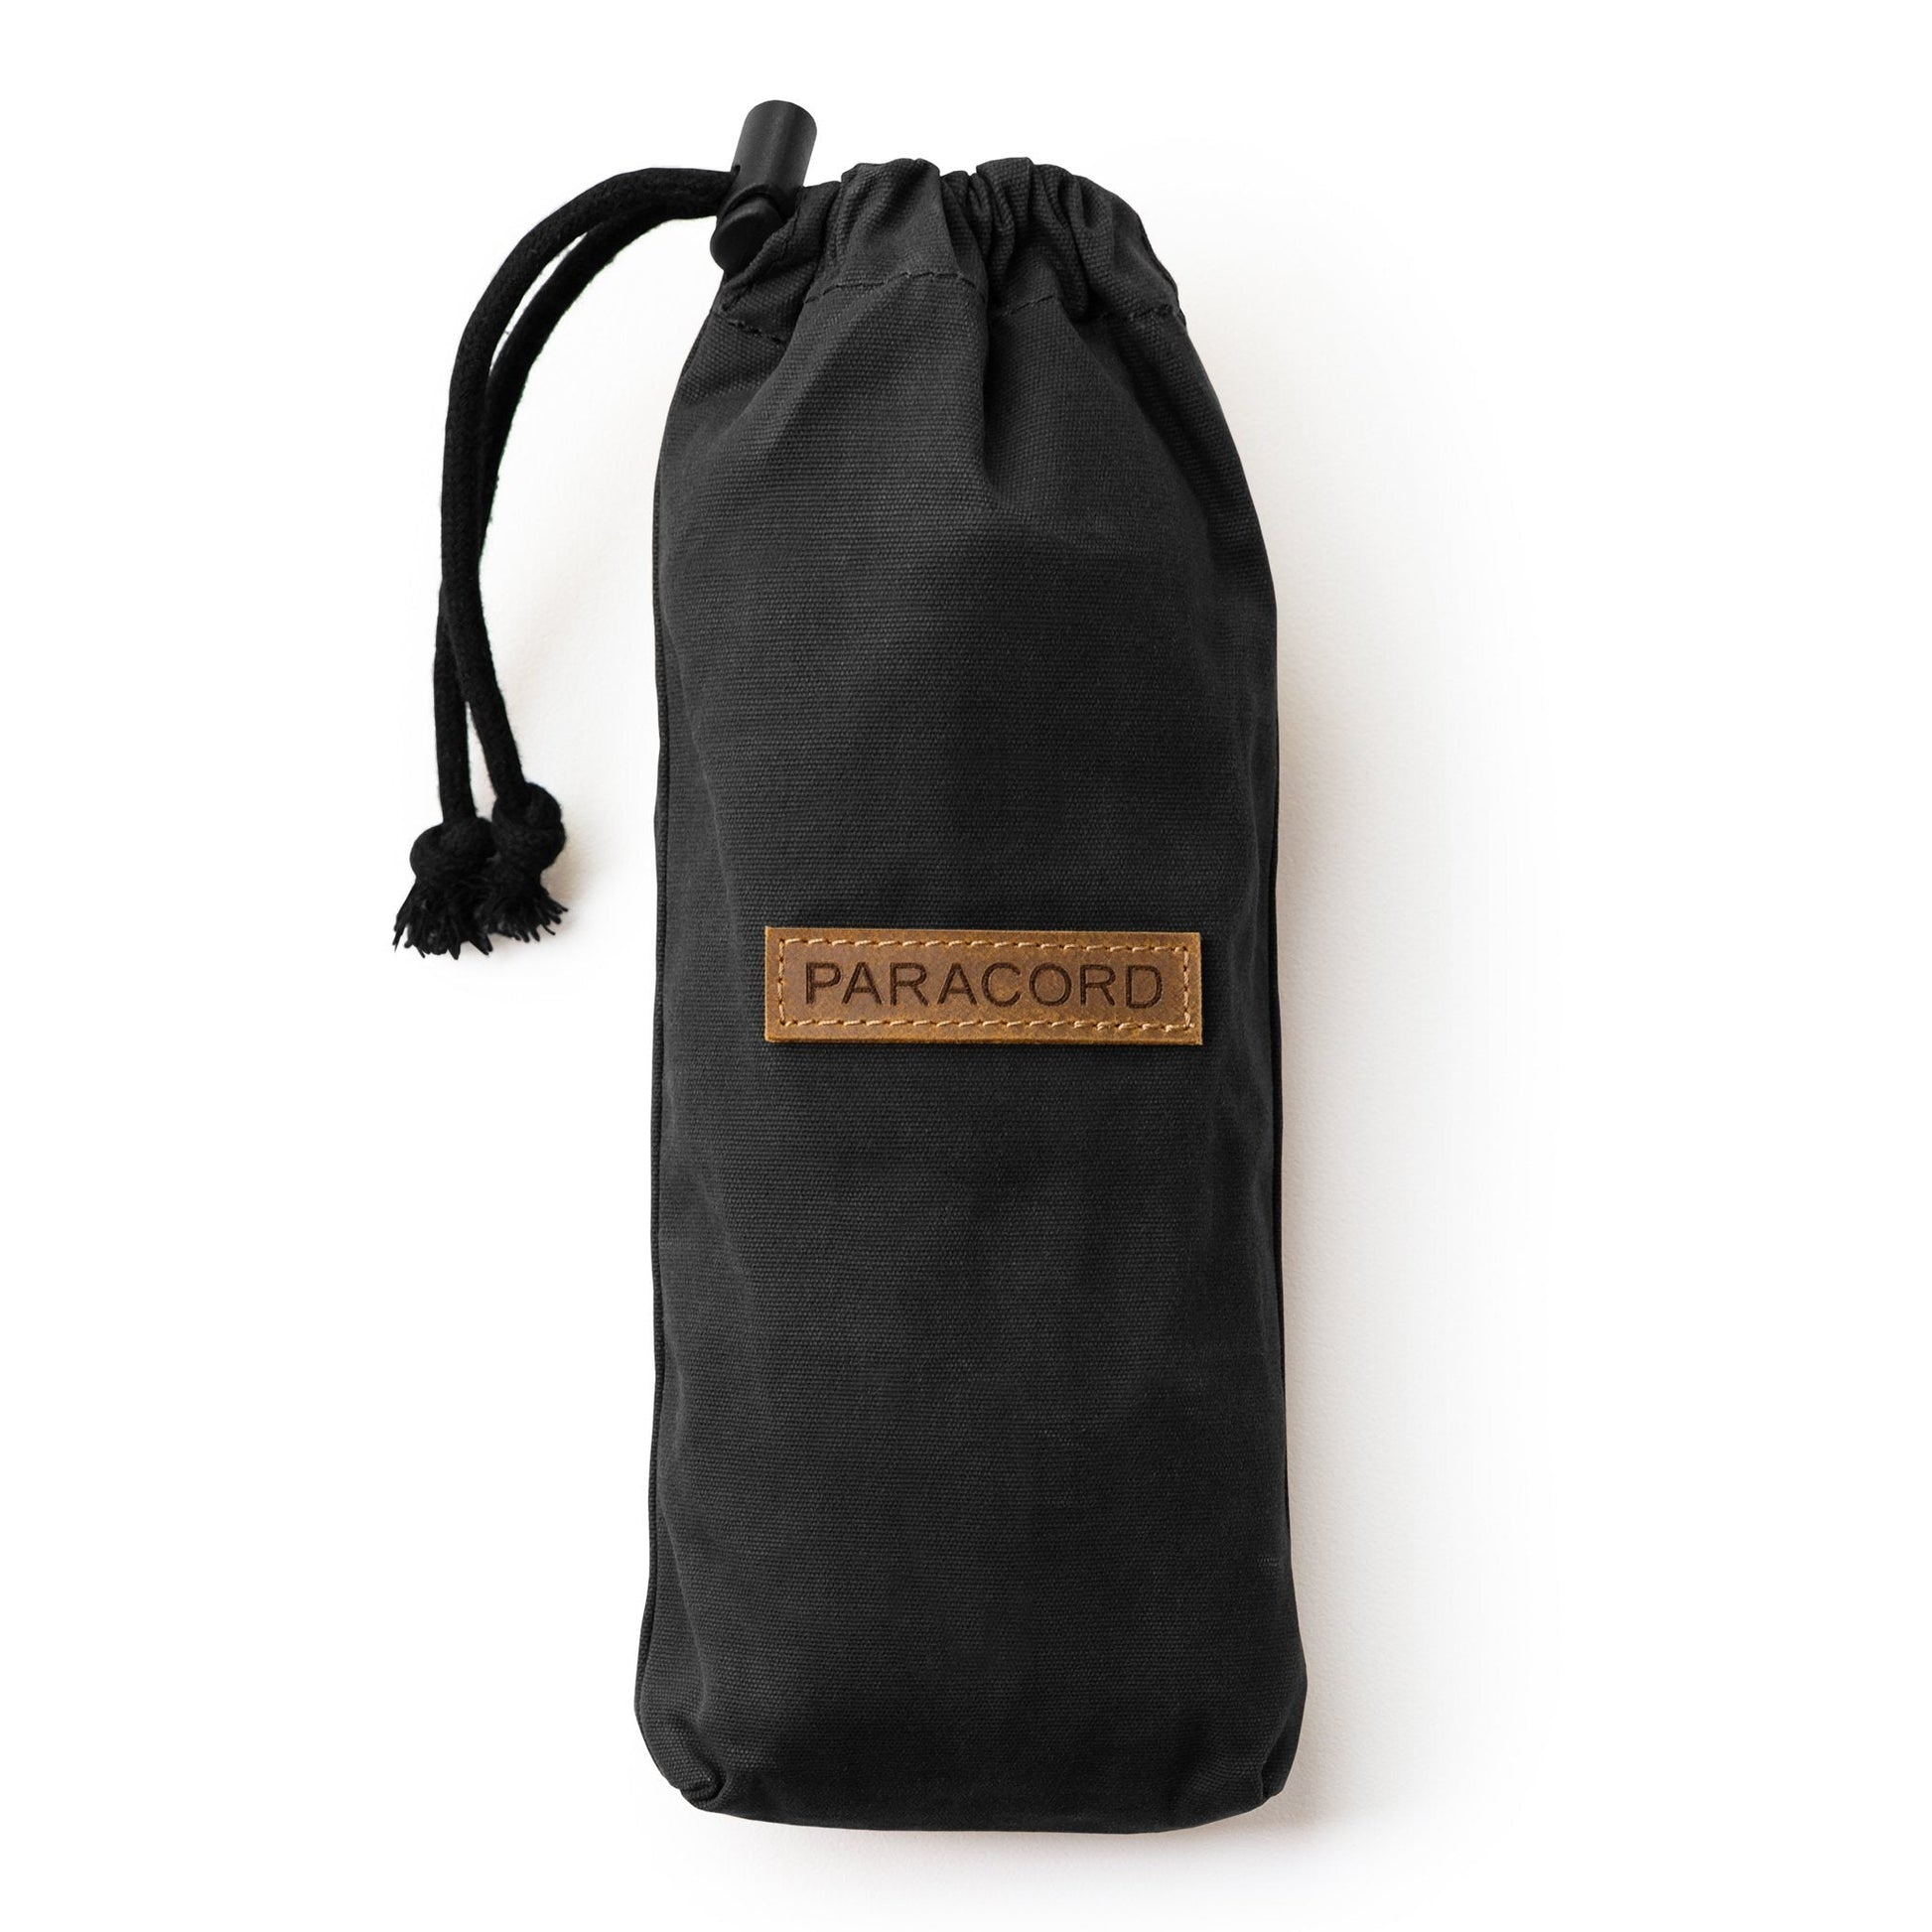 Black Canvas Bushcraft Bag with a clearly visible brand label